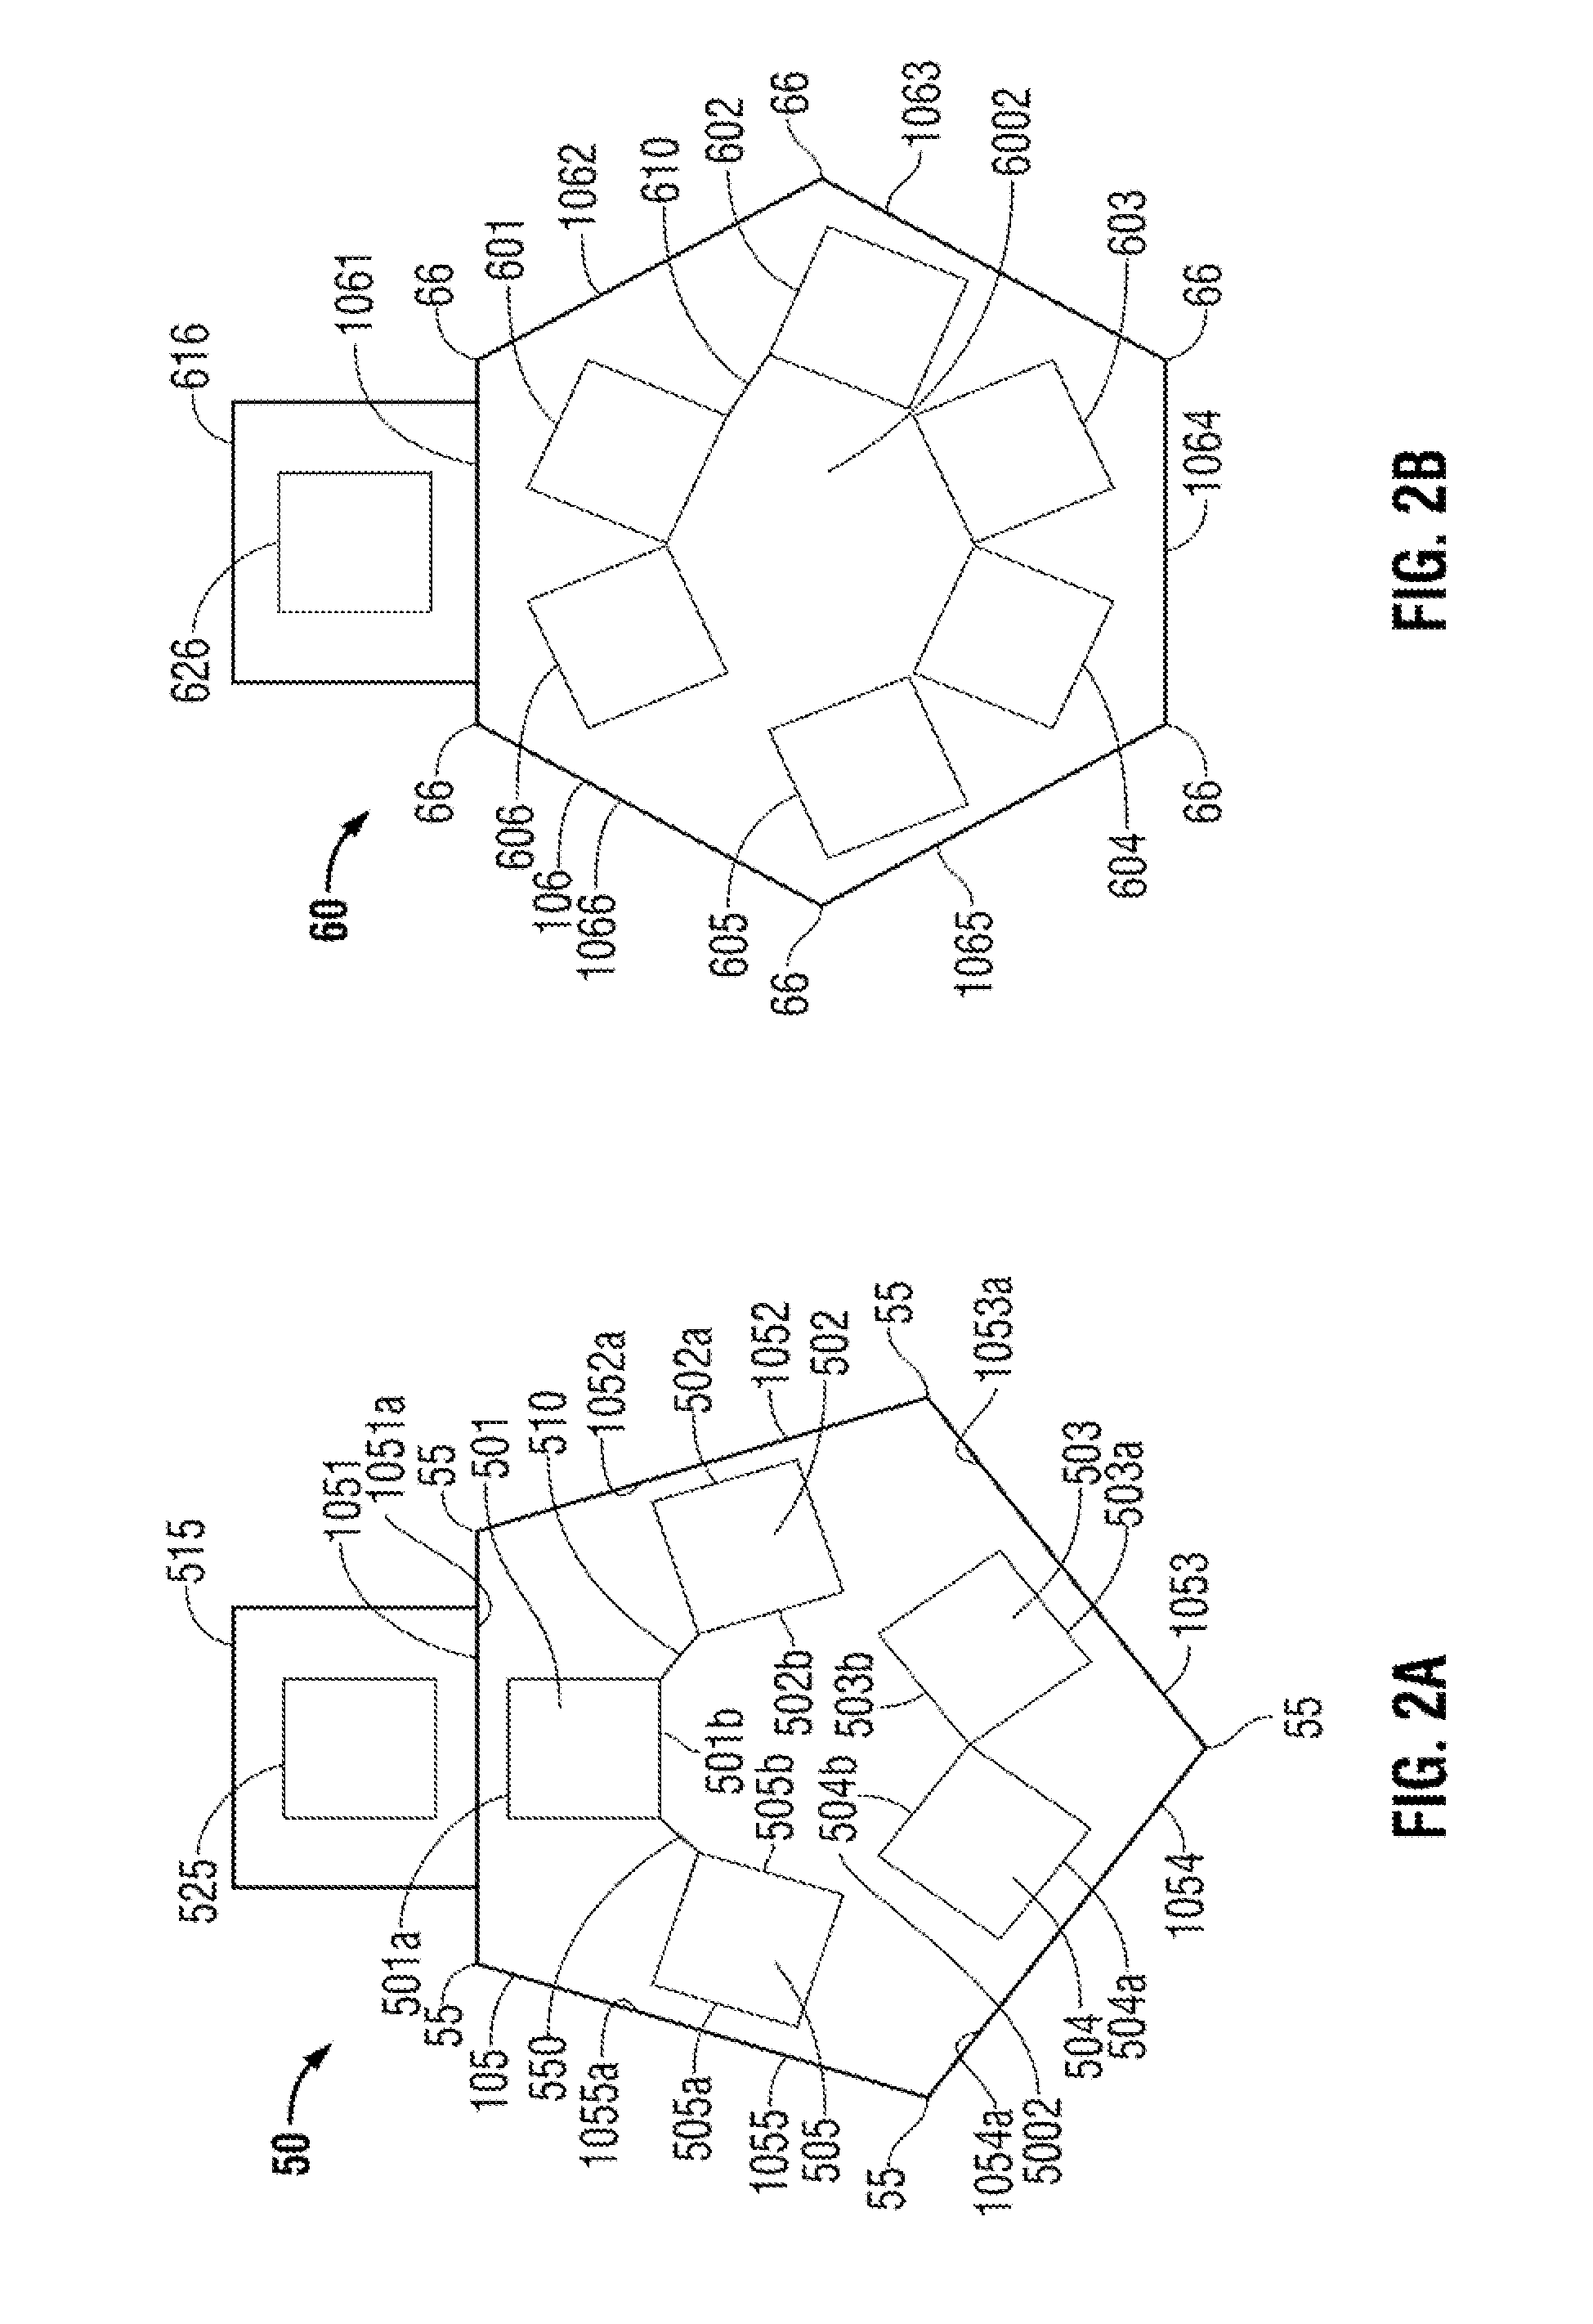 System and methods for cooling electronic equipment